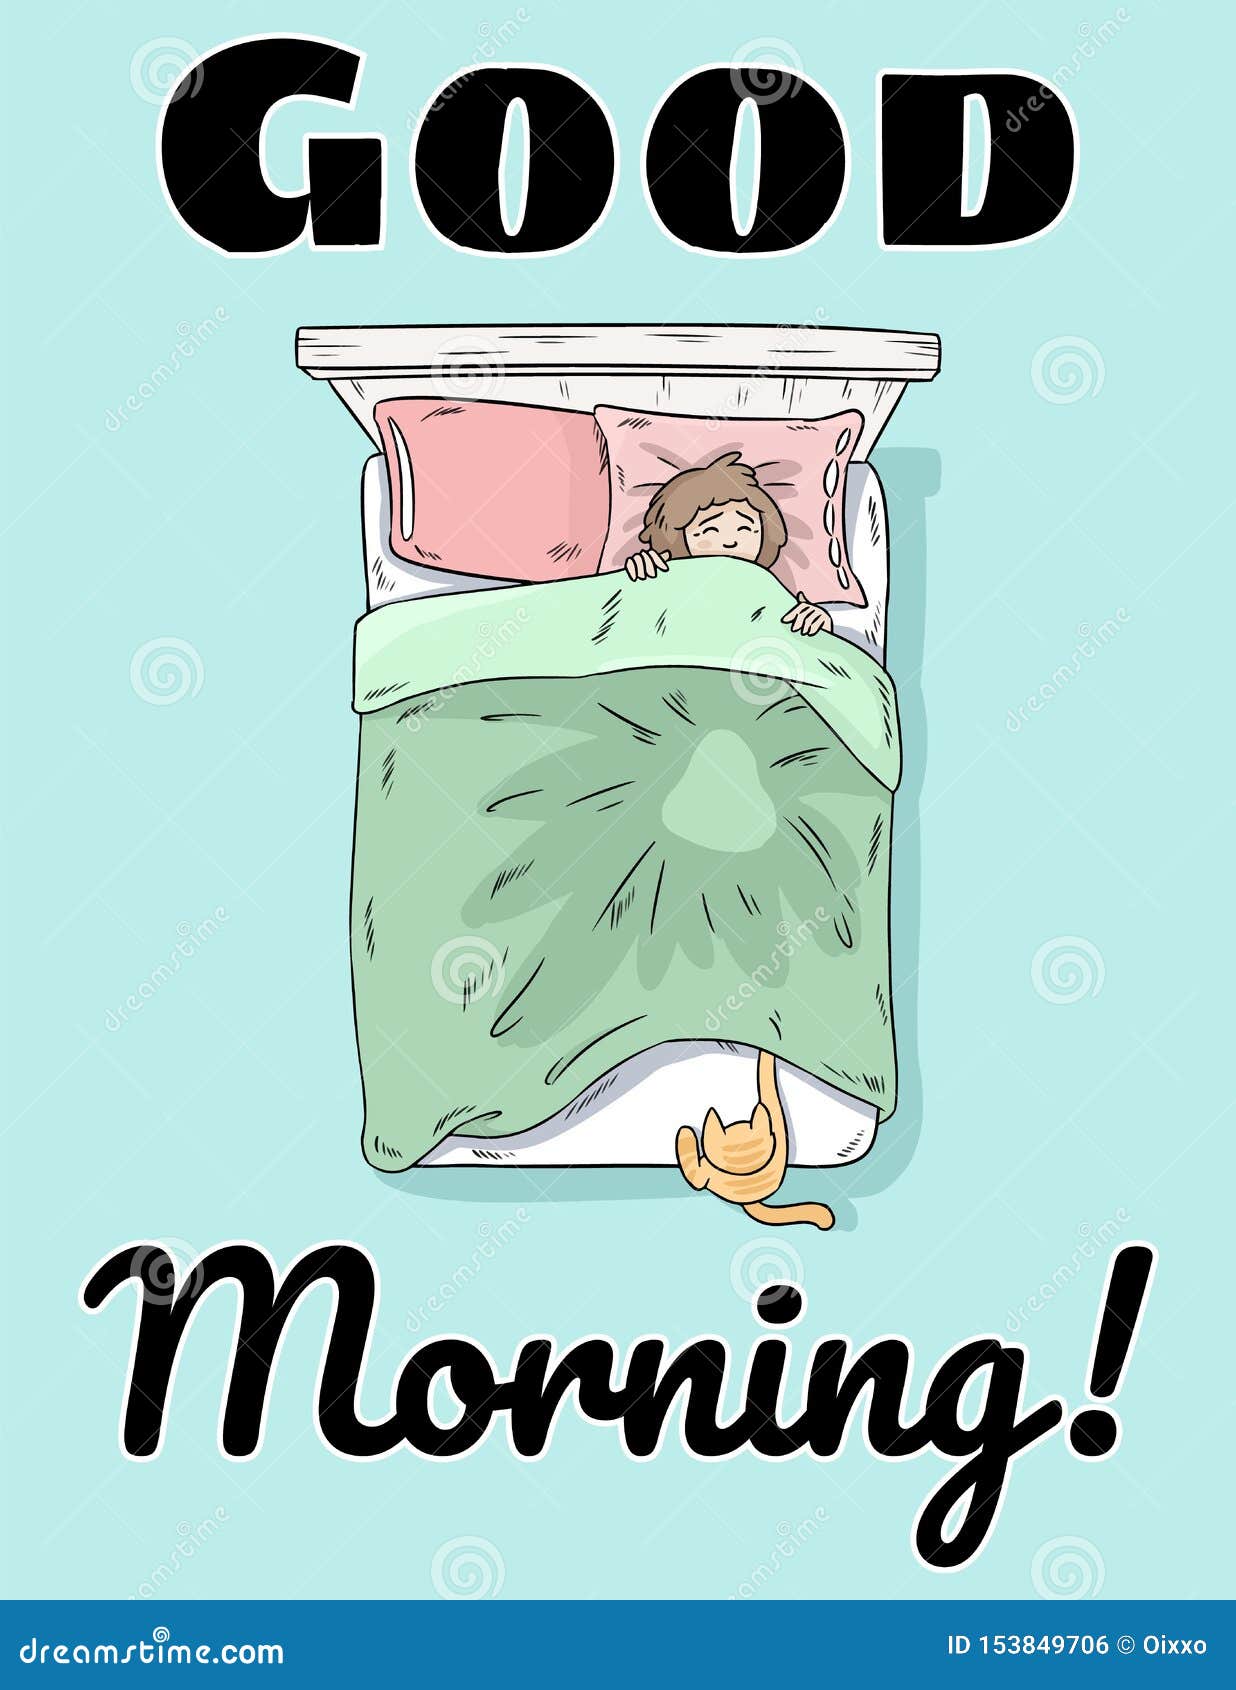 Good Morning Cute Postcard. Hand Drawn Comic Style Funny Illustration. Cat  Trying To Wake Up the Girl Stock Vector - Illustration of cartoon, bedroom:  153849706